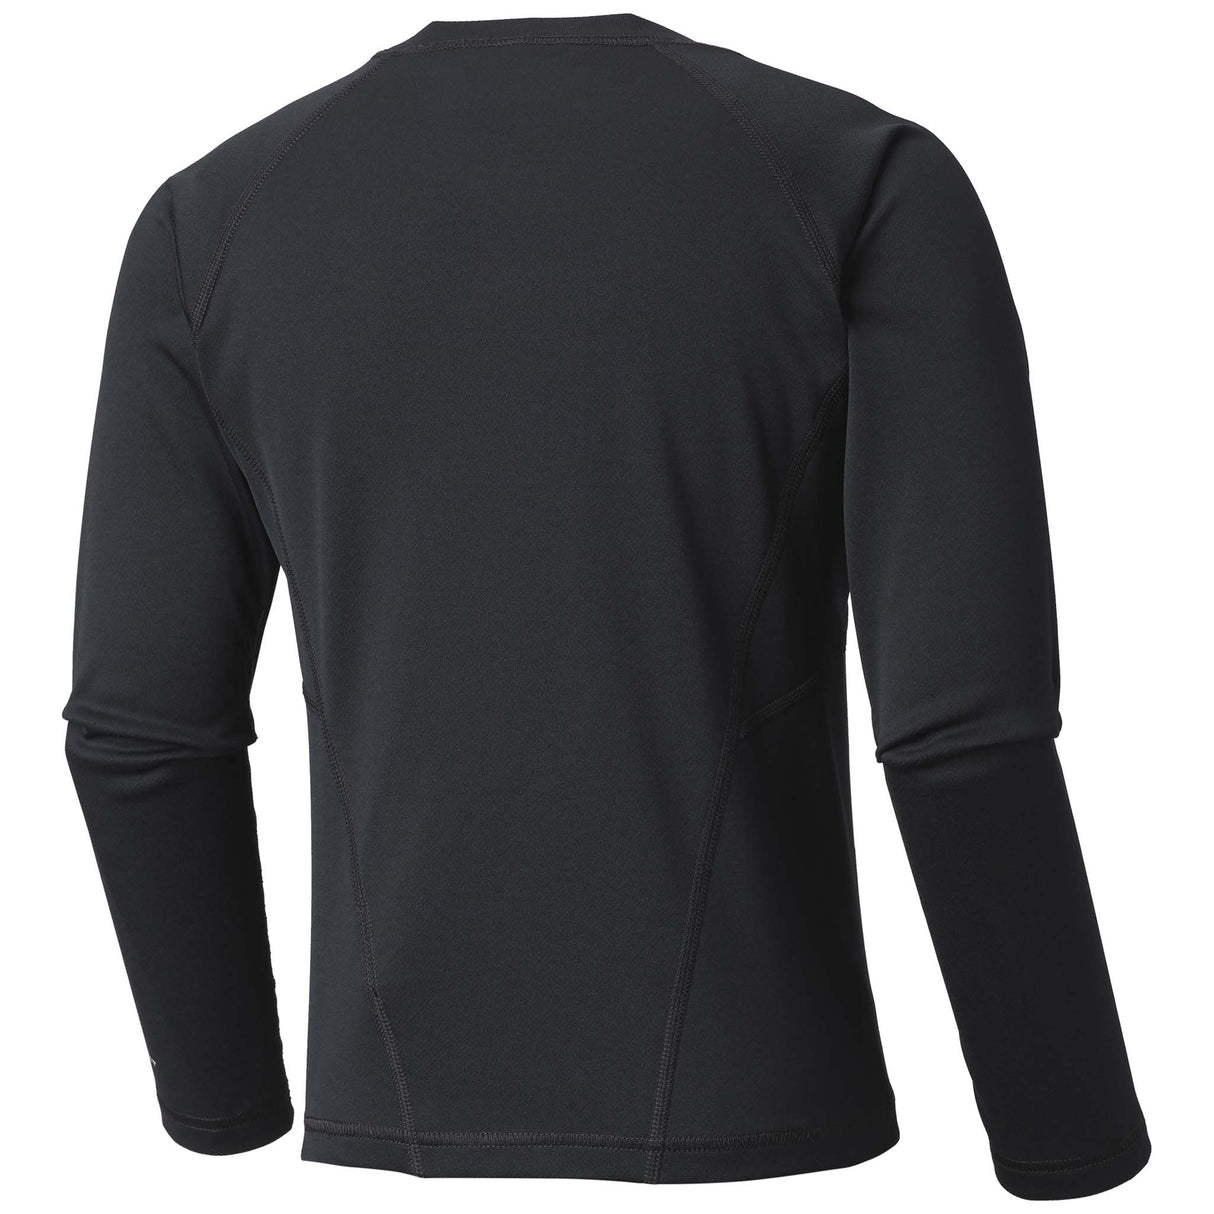 Columbia Midweight Crew 2 long sleeve base layer for children